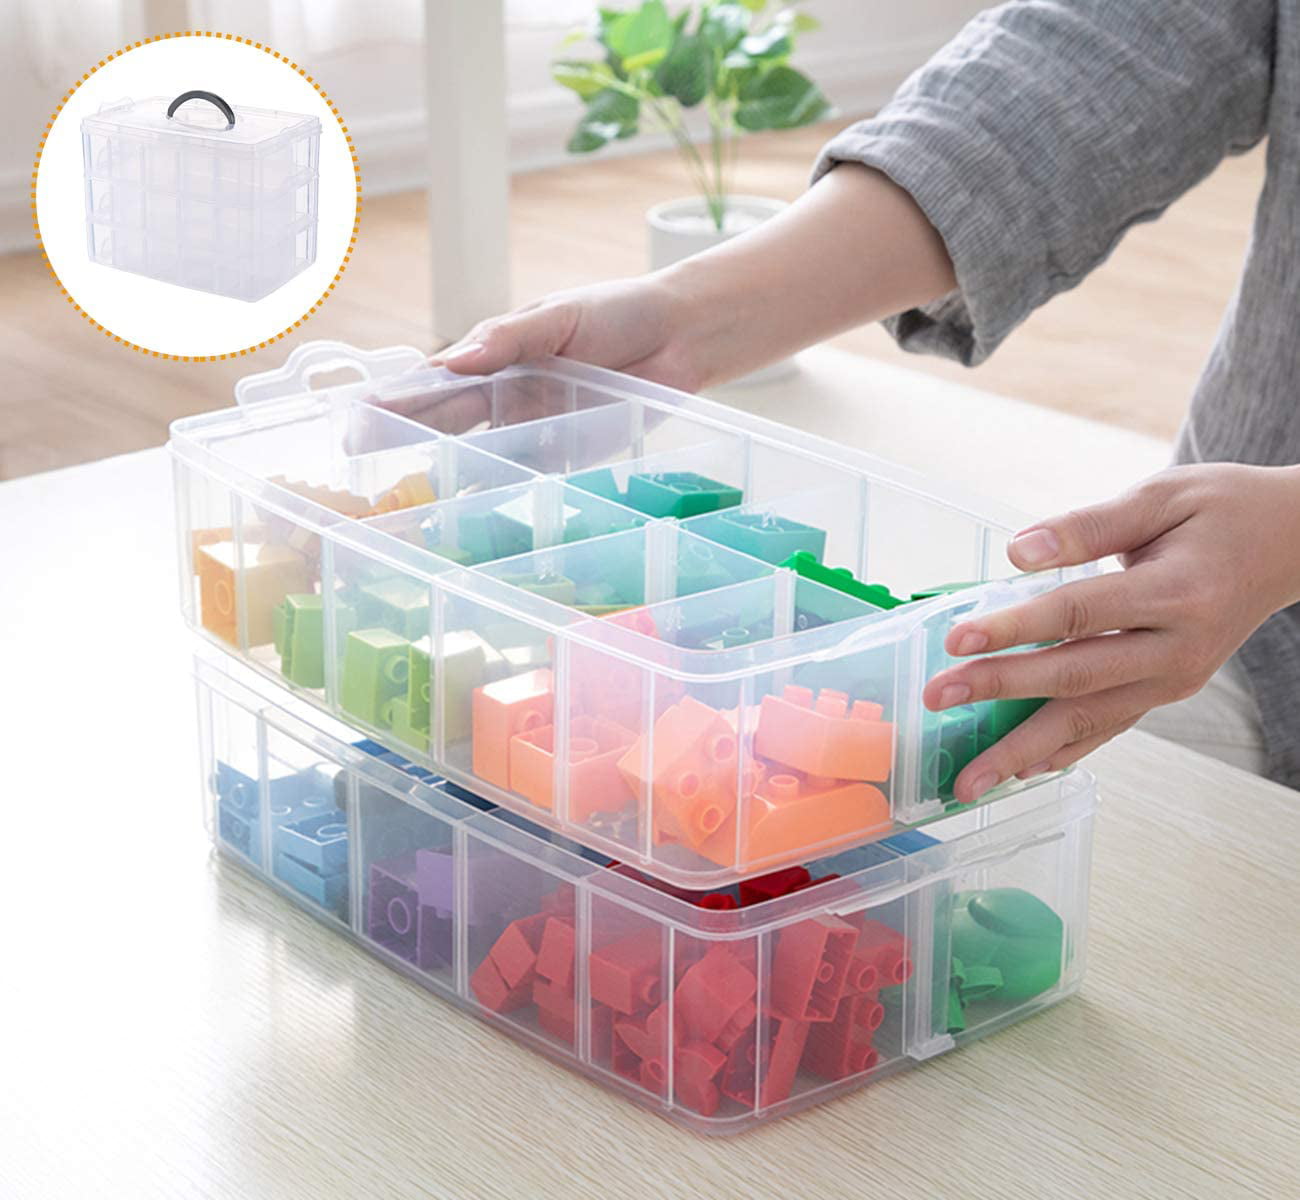 TEHAUX 3pcs Beads Craft Organizers and Storage Button Case Storage Holders  for Tiny Stuff Mini Sundries Organizer Bead Holder Organizer Bead Storage